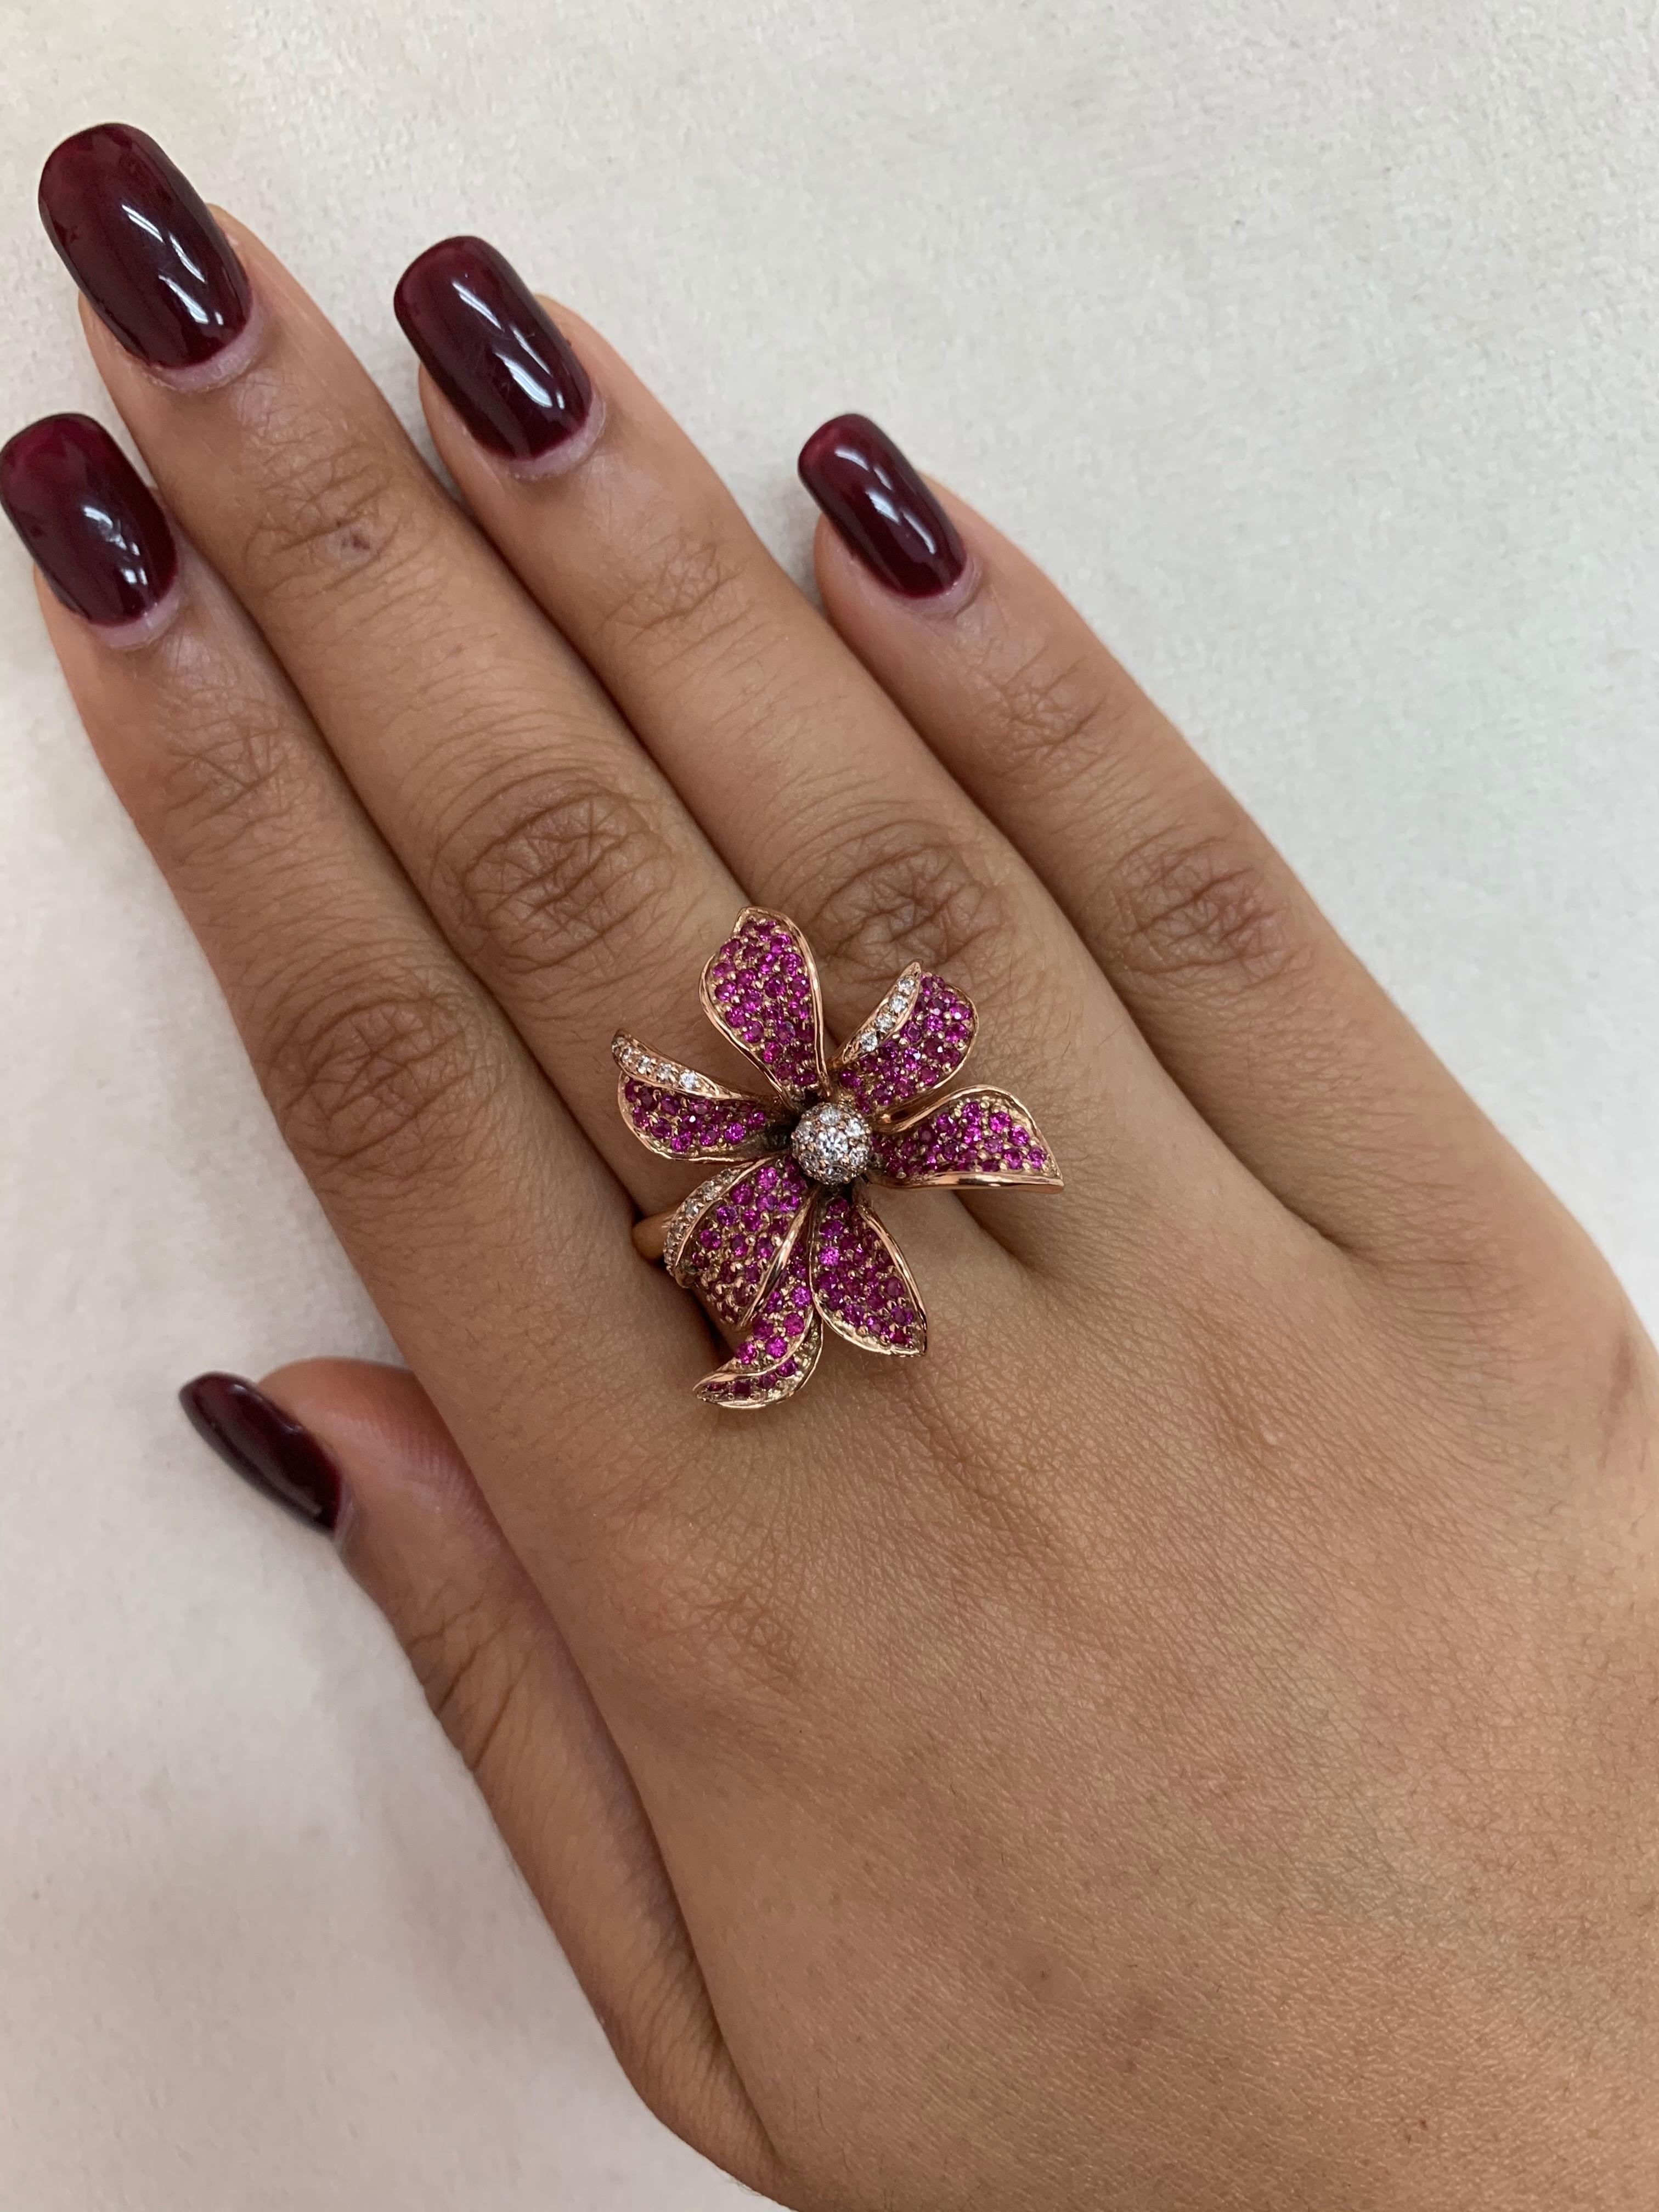 Glamorous Gemstones - Sunita Nahata started off her career as a gemstone trader, and this particular collection reflects her love for multi-colored semi-precious gemstones. This ring presents a floral ruby with white diamond detailing.  These gems